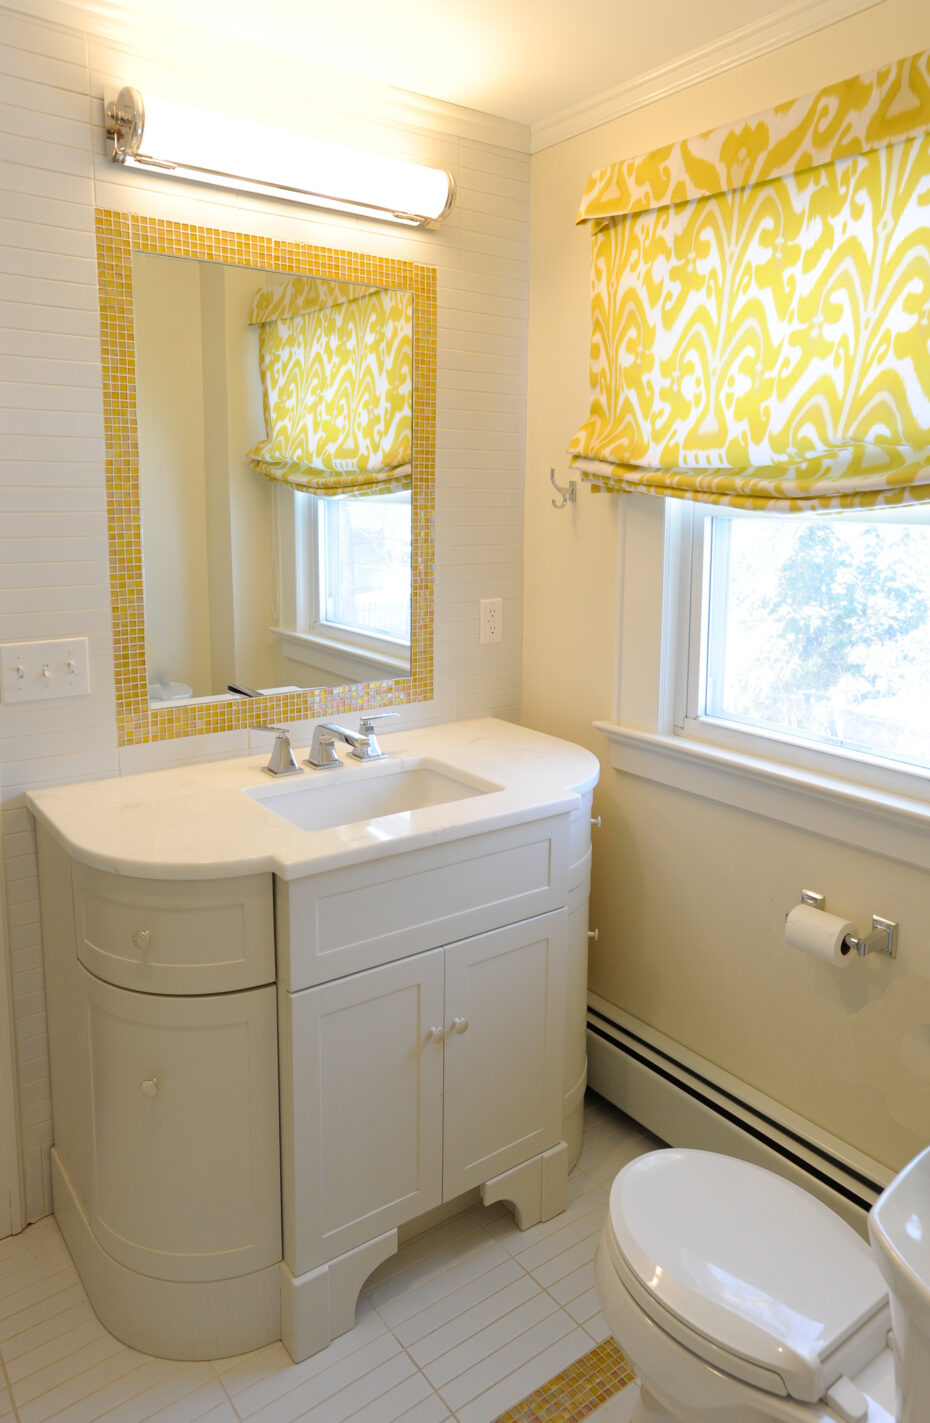 bathroom with white curved cabinet and yellow siccis glass tile